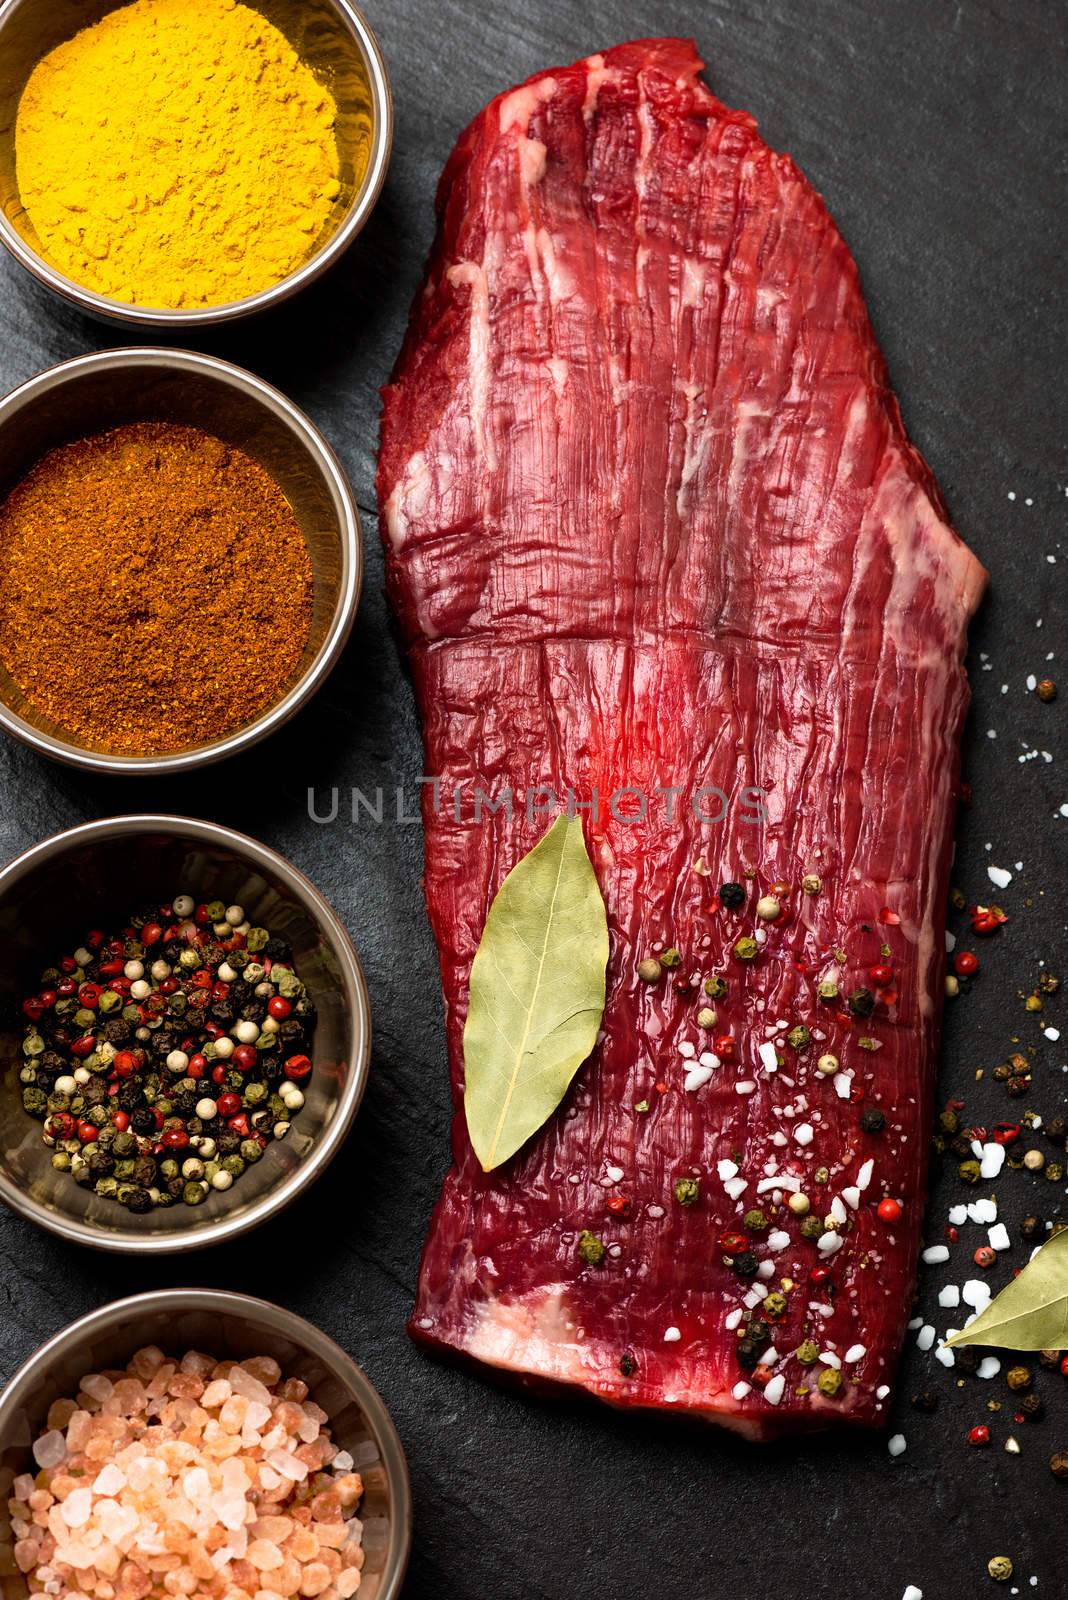 Spices in bowls and raw flank steak by Nanisimova